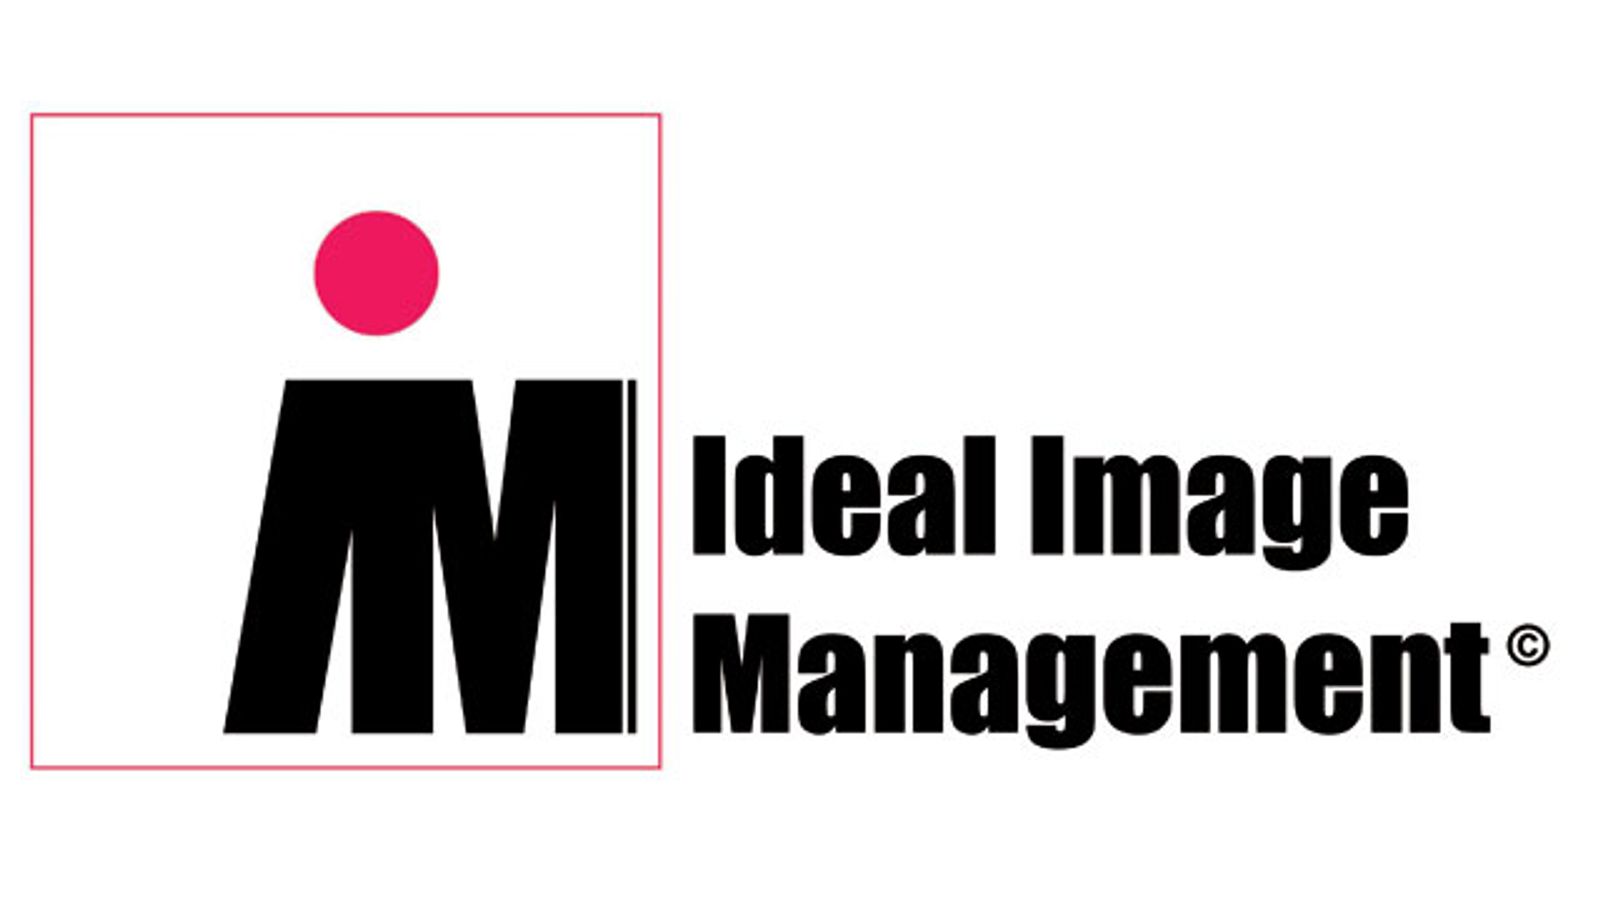 Ideal Image Management Is Industry's Newest Adult Talent Agency